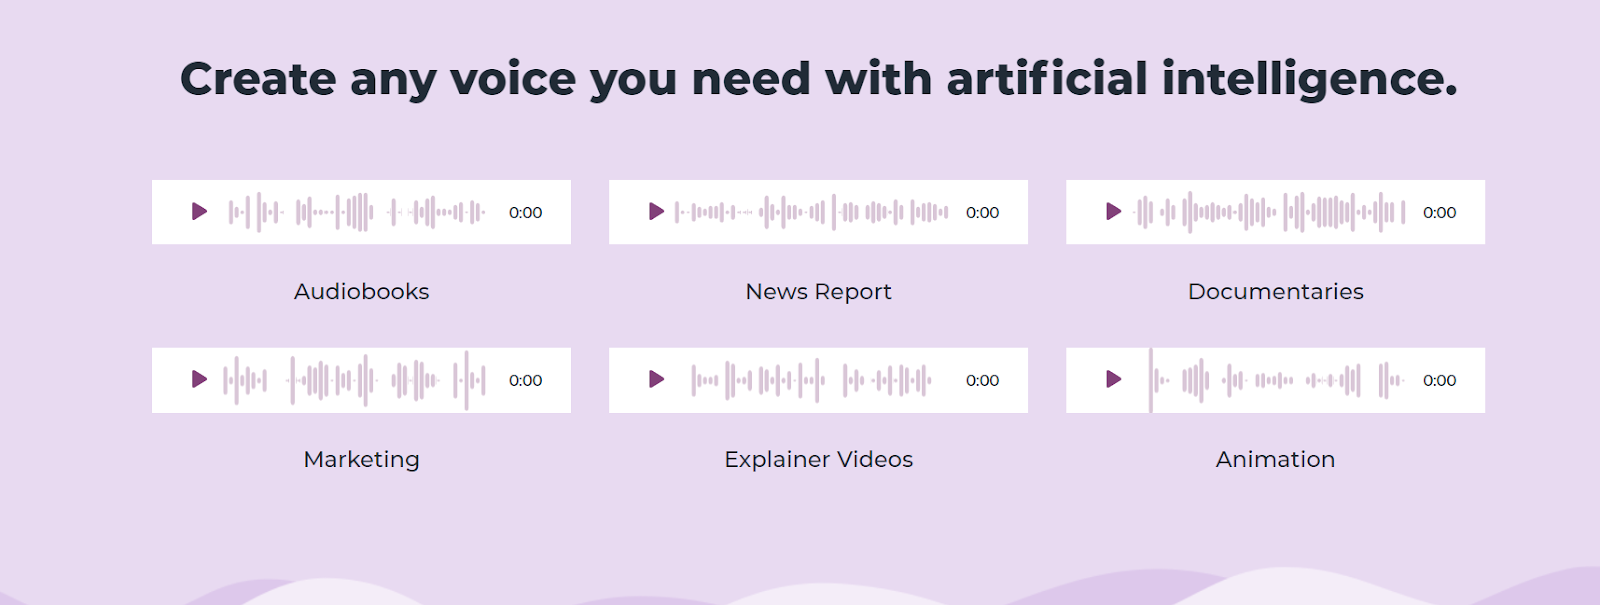 As a user of SpeechMaker, you can create your text-to-speech (TTS) voice. 